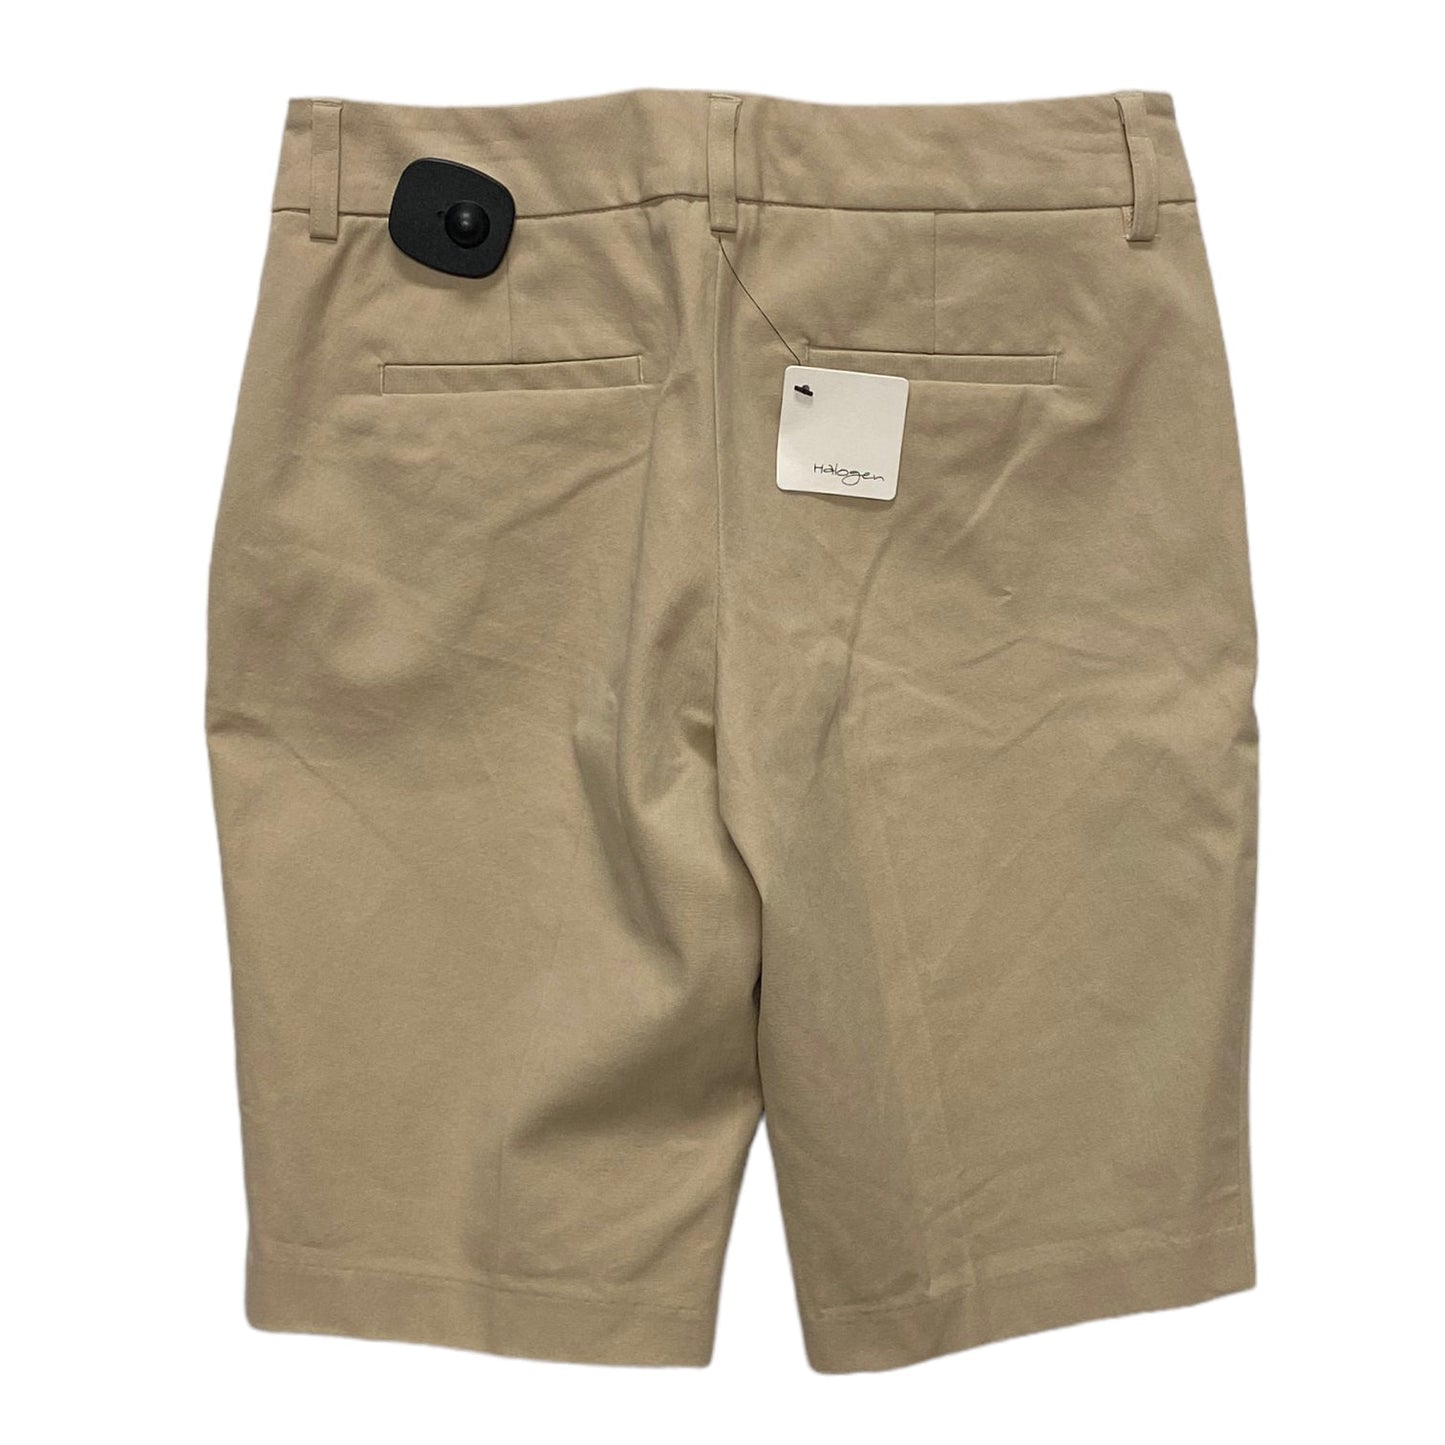 Shorts By Halogen  Size: 0